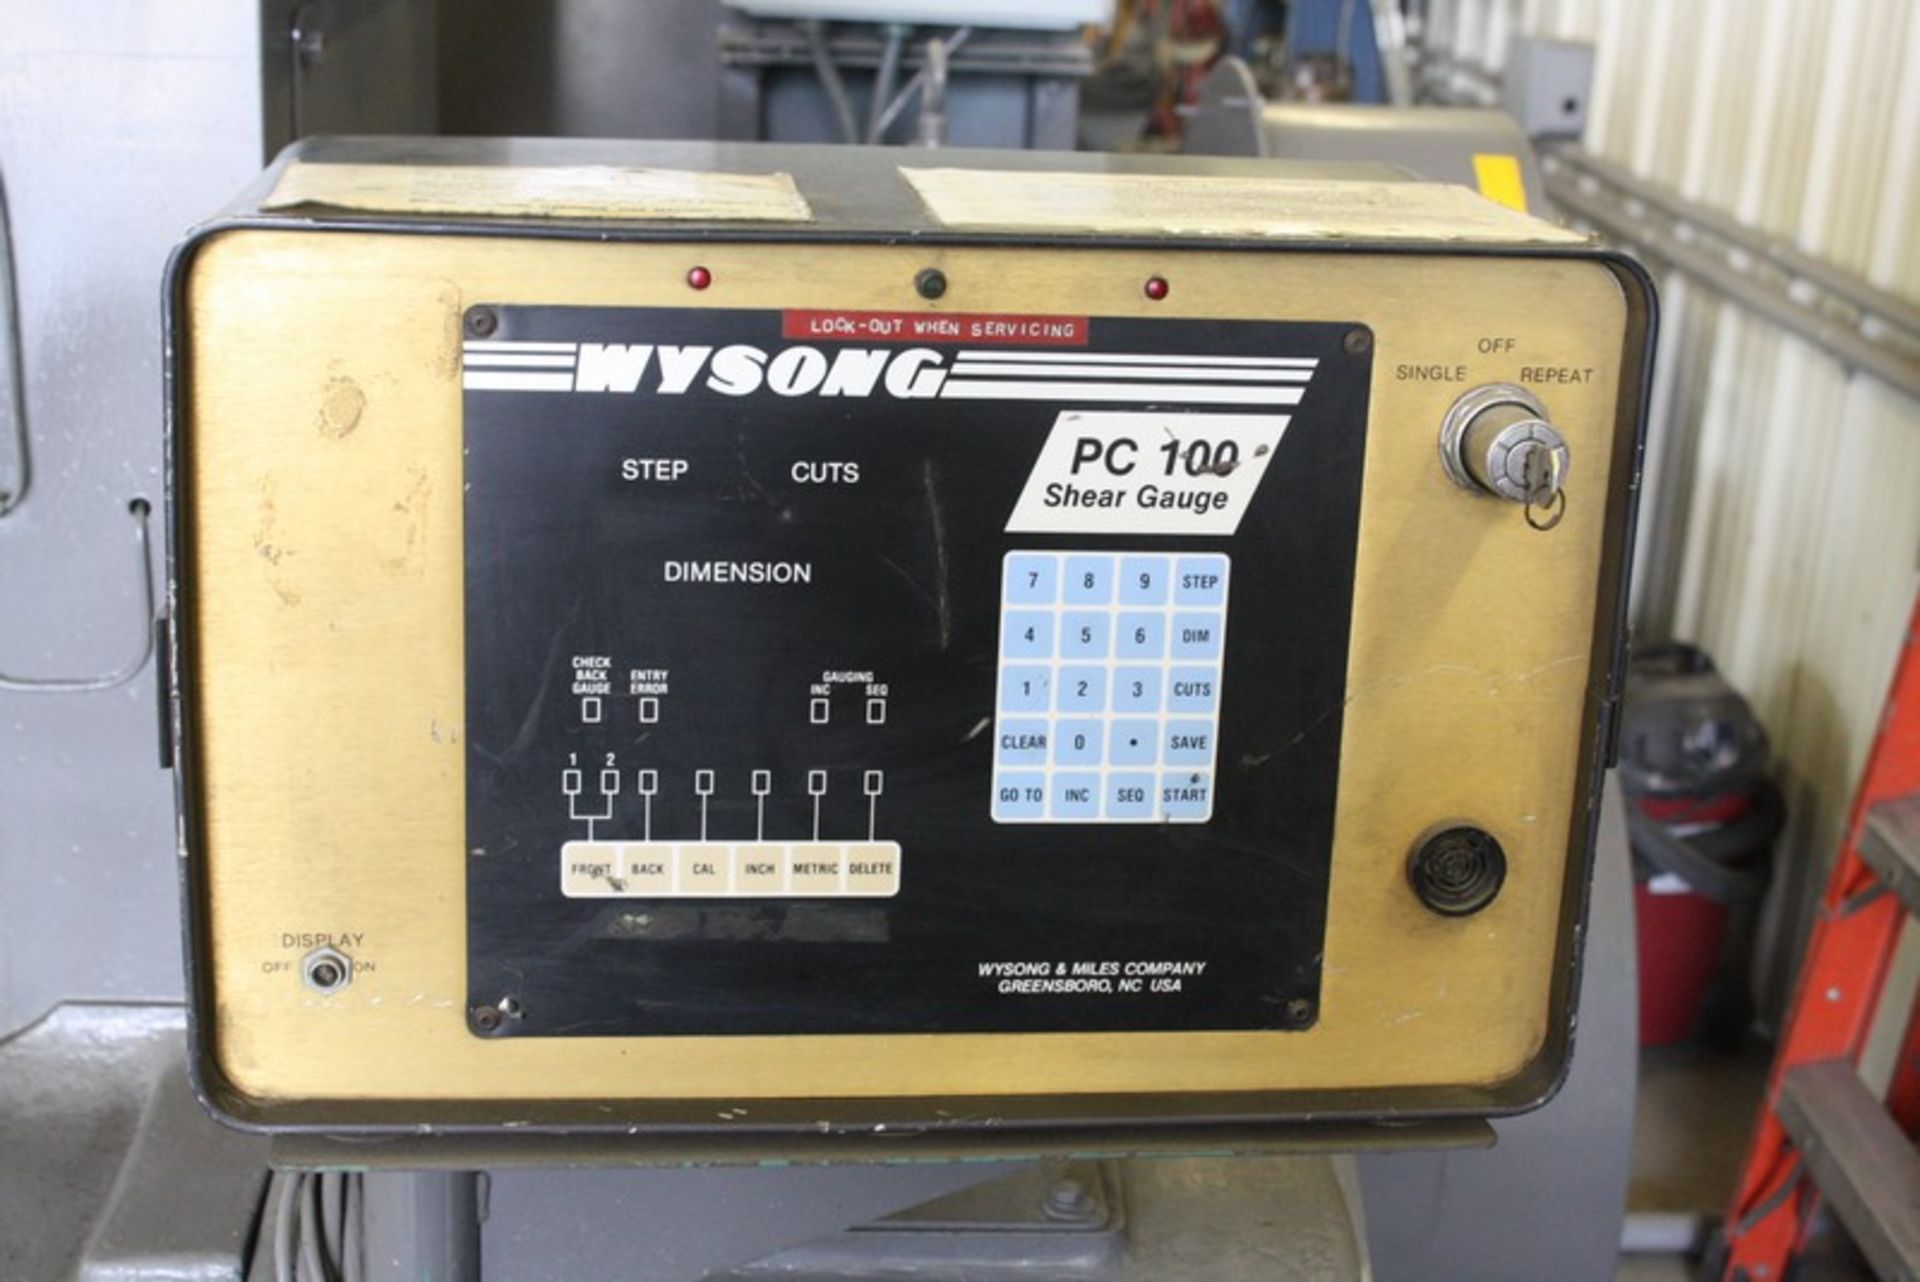 WYSONG Model no. 1250 12 FT. X 1/2” SHEAR, S/N P48-175 (1990): 48” programmable back gauge, - Image 4 of 11